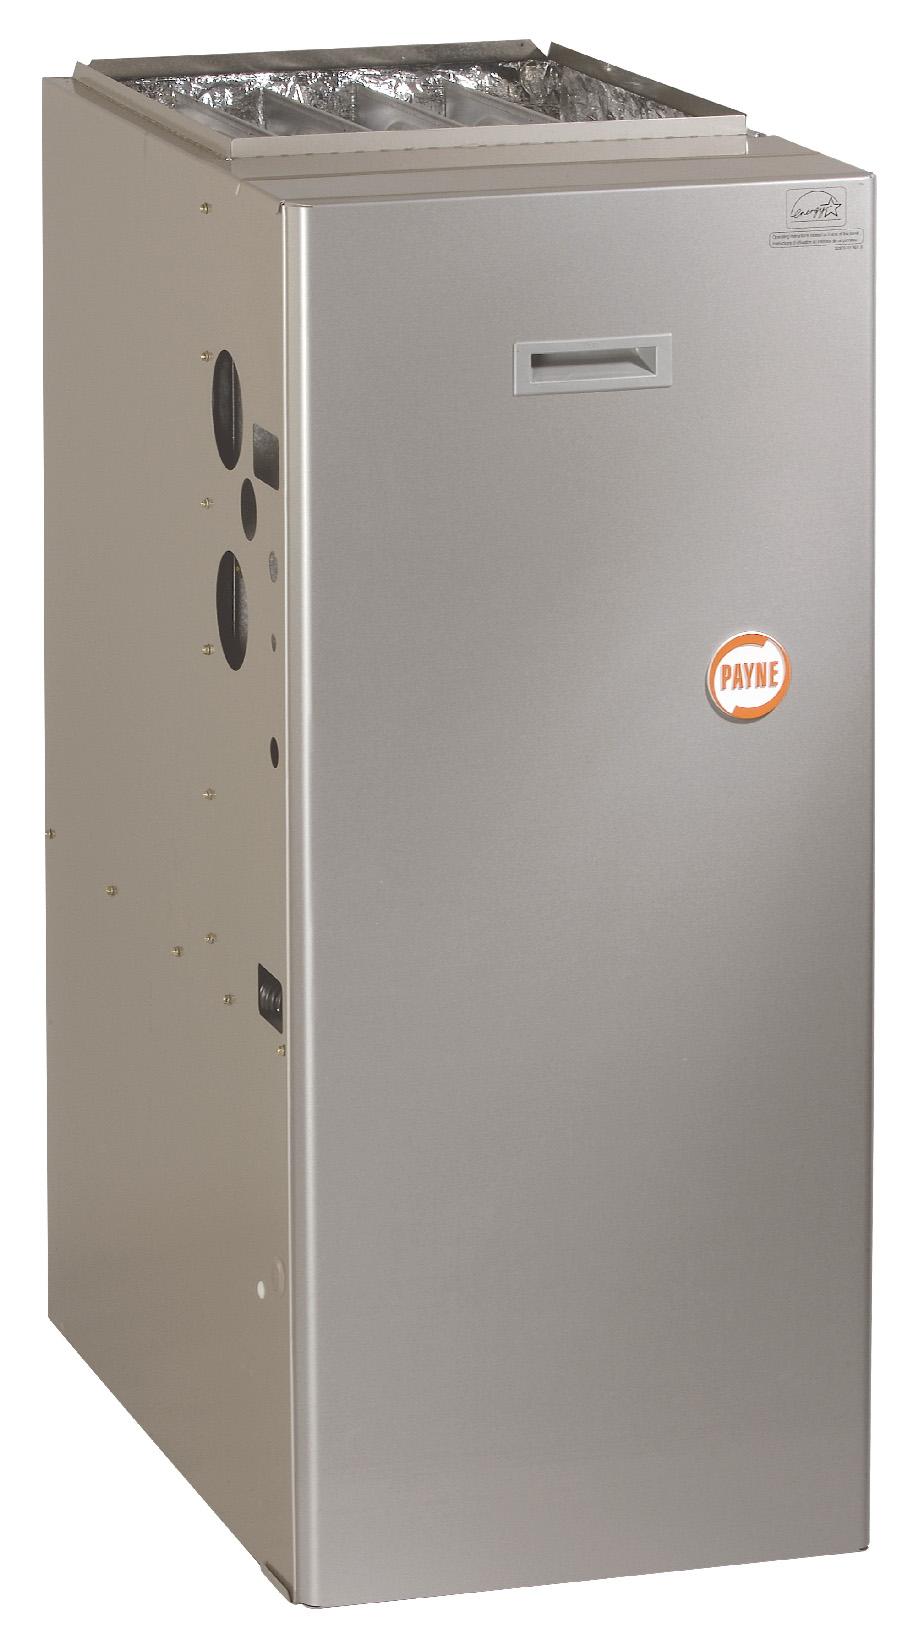 MULTIPOISE CONDENSING GAS FURCE Product Data INSTALLATION FLEXIBILITY The 4 -way multipoise design allows a model to be installed in an upflow, downflow, hizontal ientation.